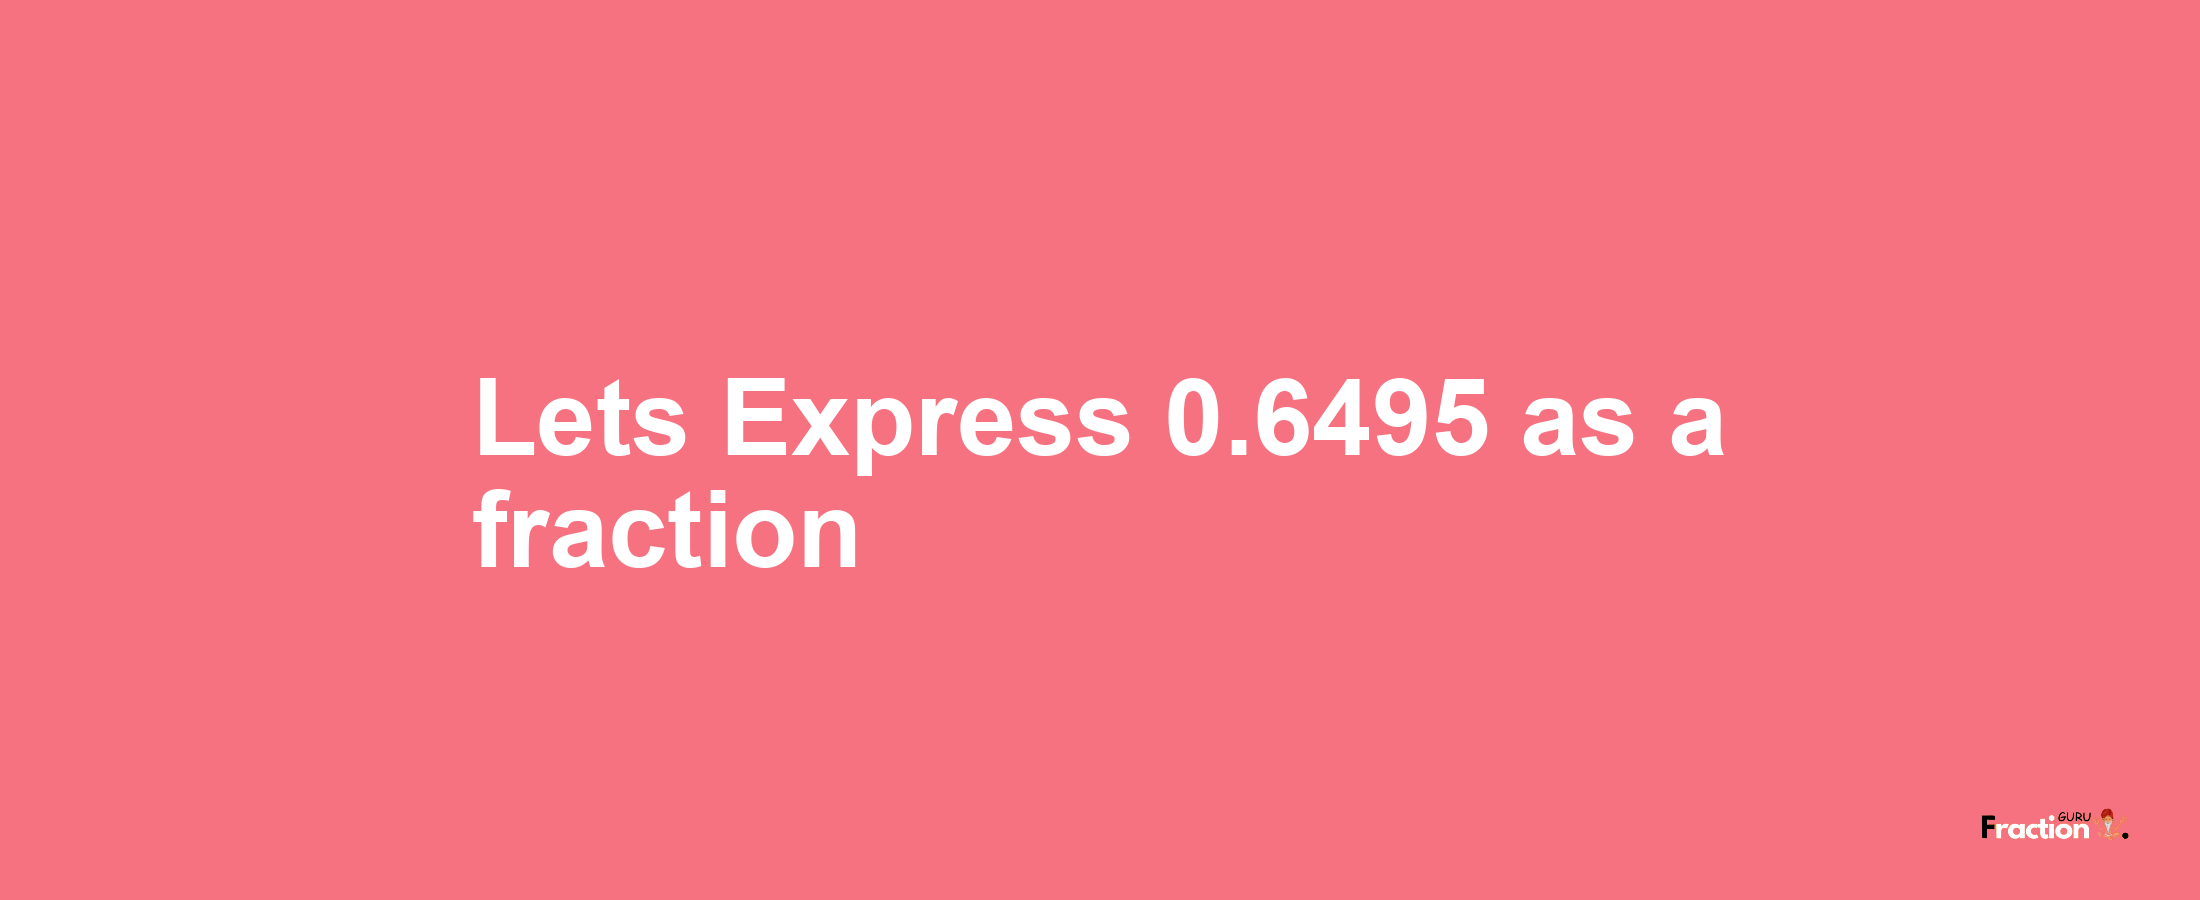 Lets Express 0.6495 as afraction